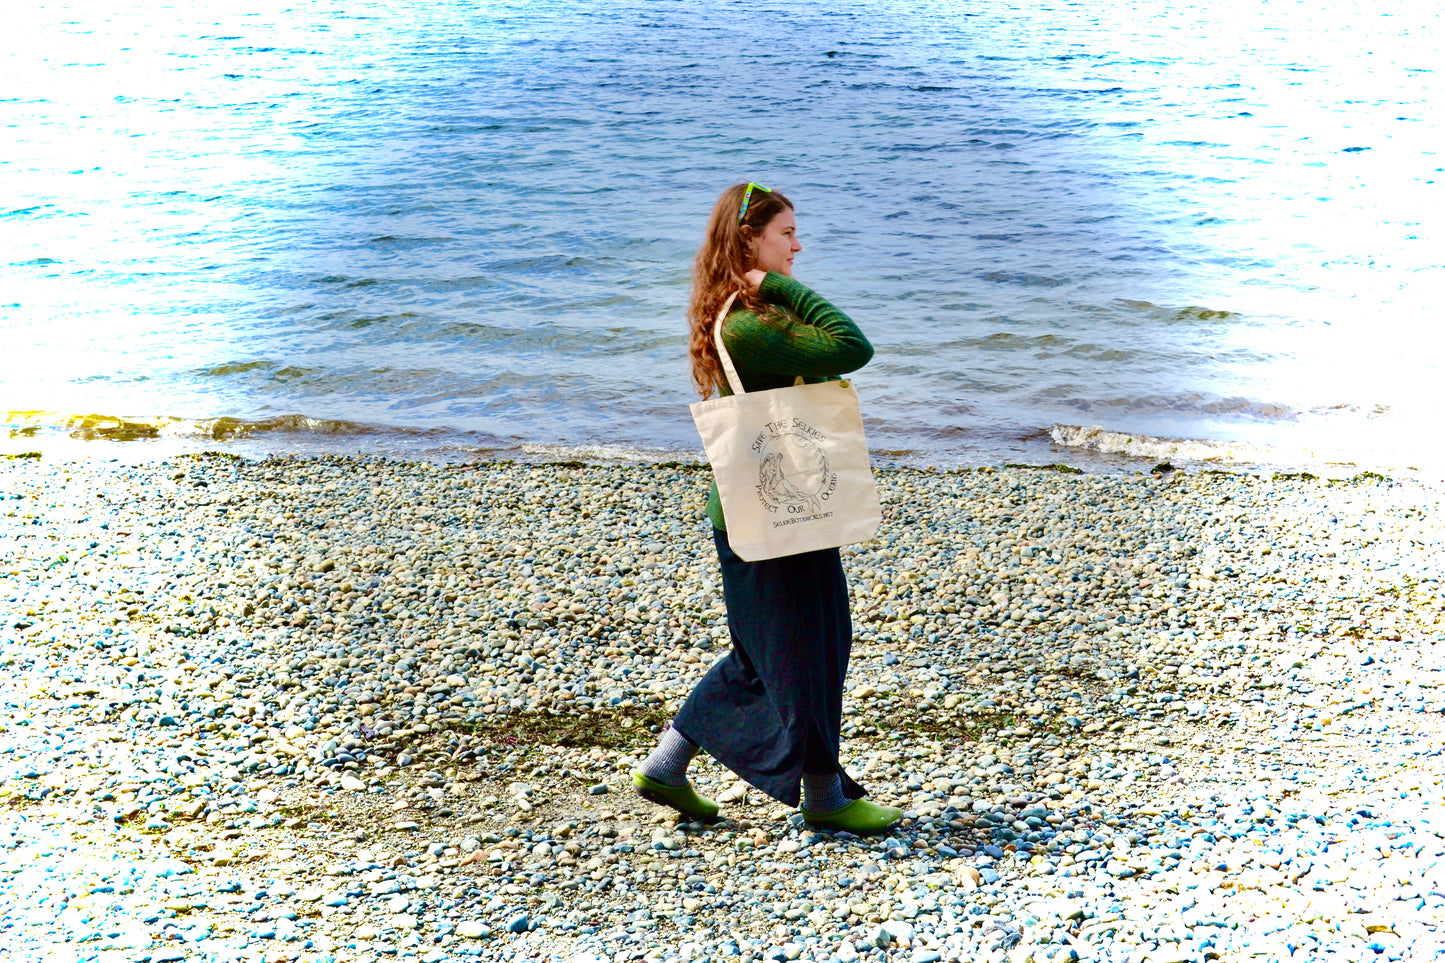 Save The Selkie's LARGE Tote Bag